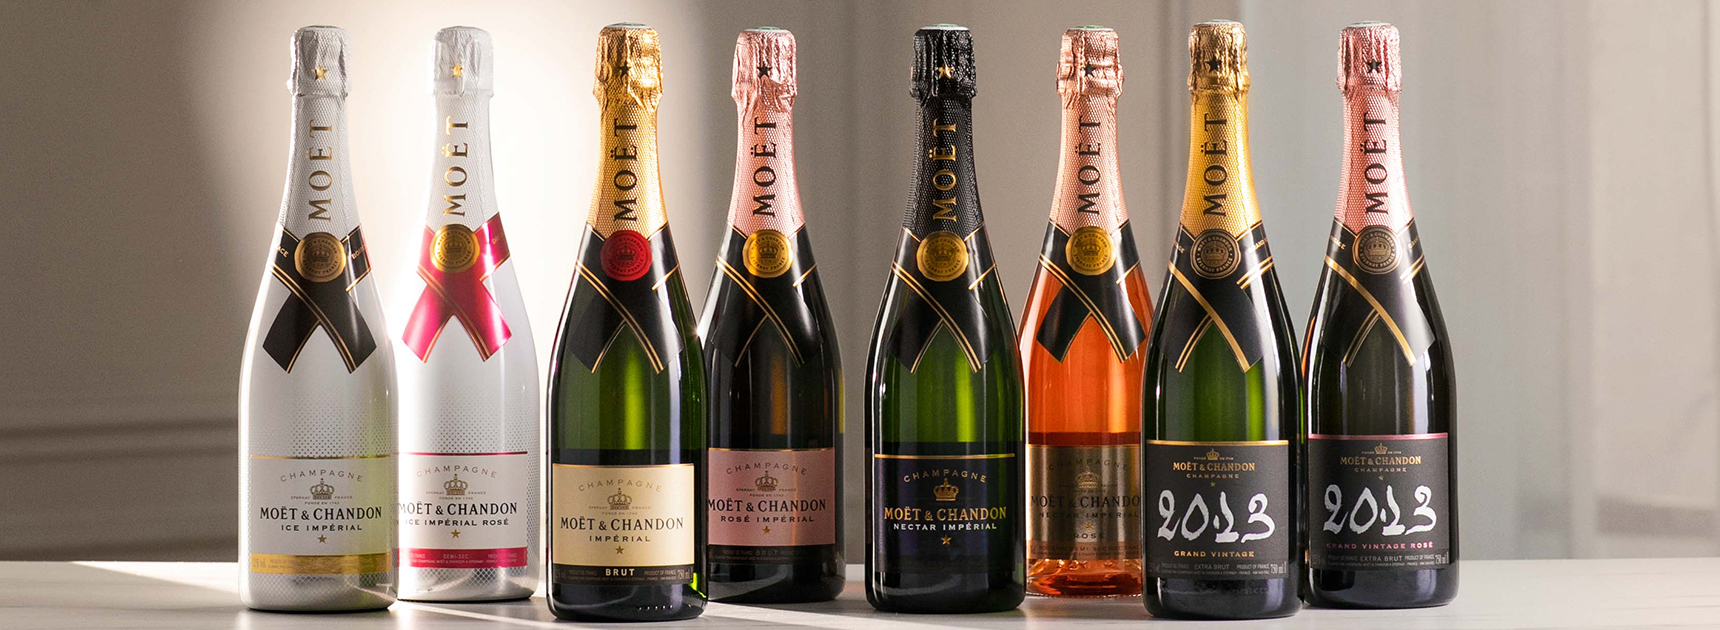 Champagne bottles in various sizes, Imperial, Moet et Chandon winery, LVMH  luxury goods group, Louis Vuitton Moet Hennessy, Epernay, Champagne, Marne,  France, Europe